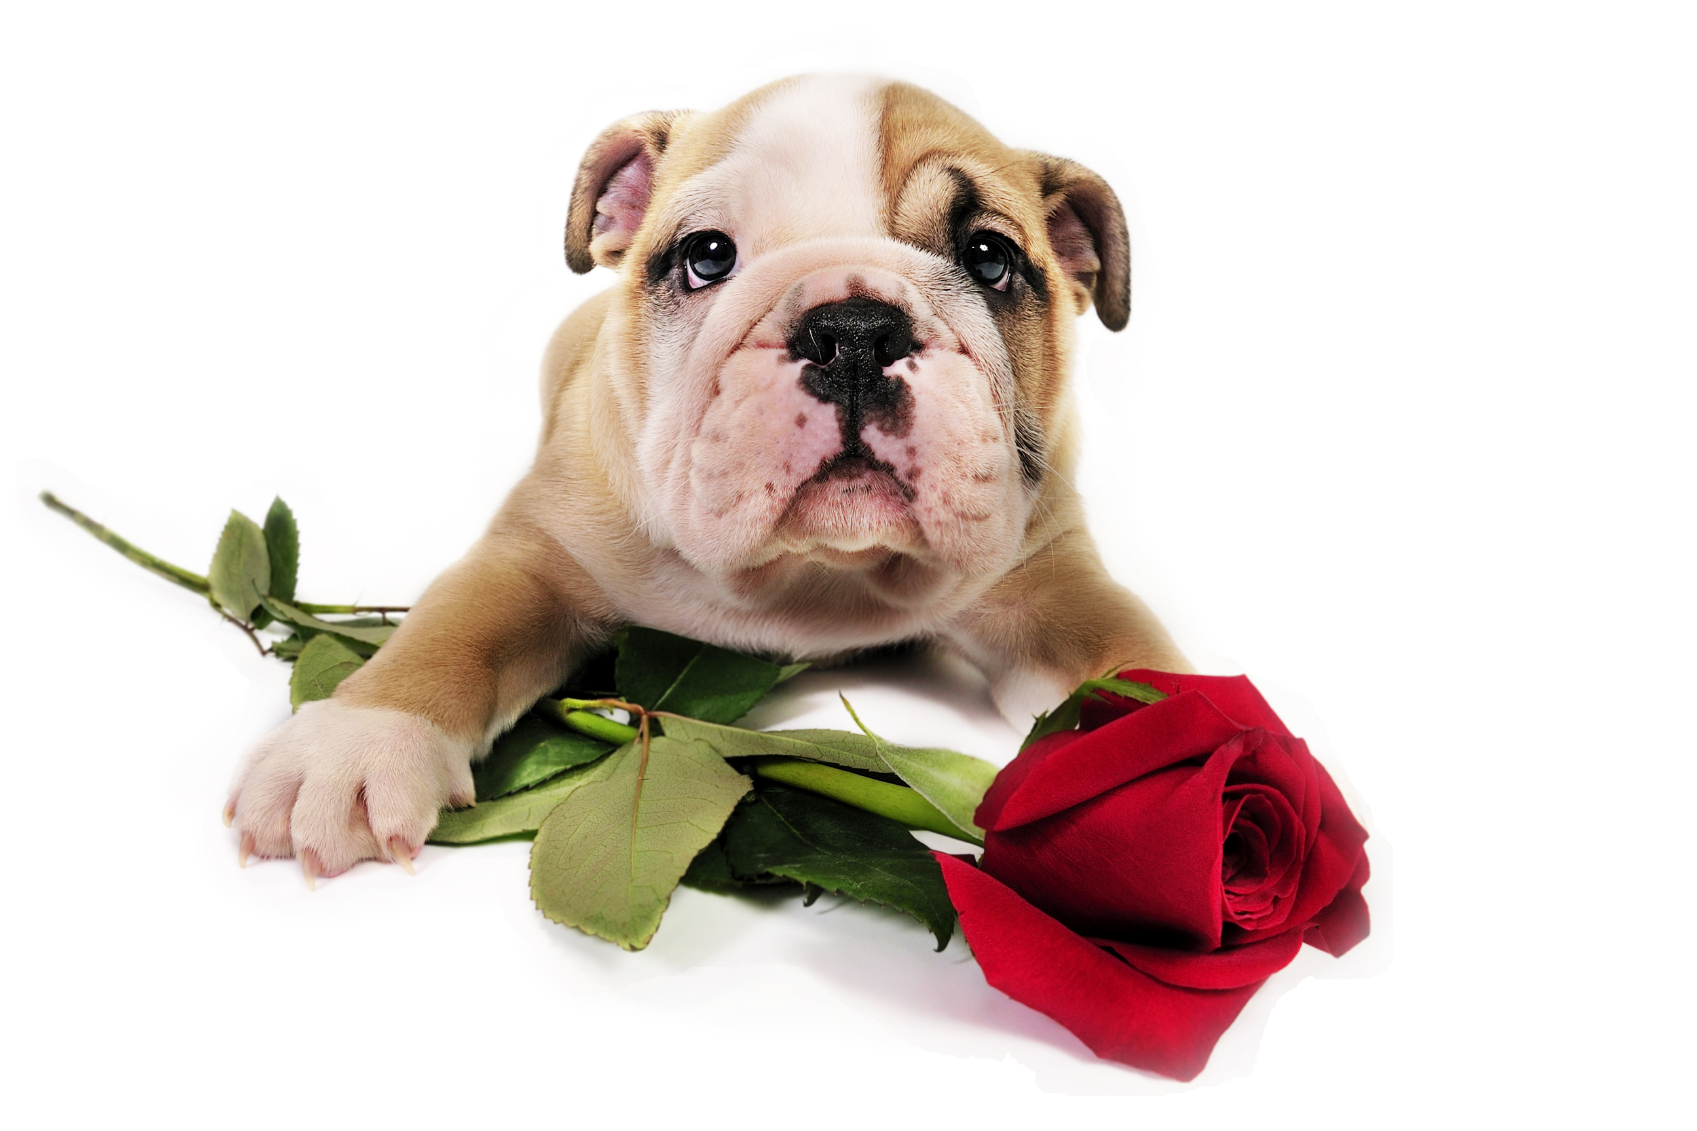 English Bulldog Puppy With Valentine Rose In Front Of A White